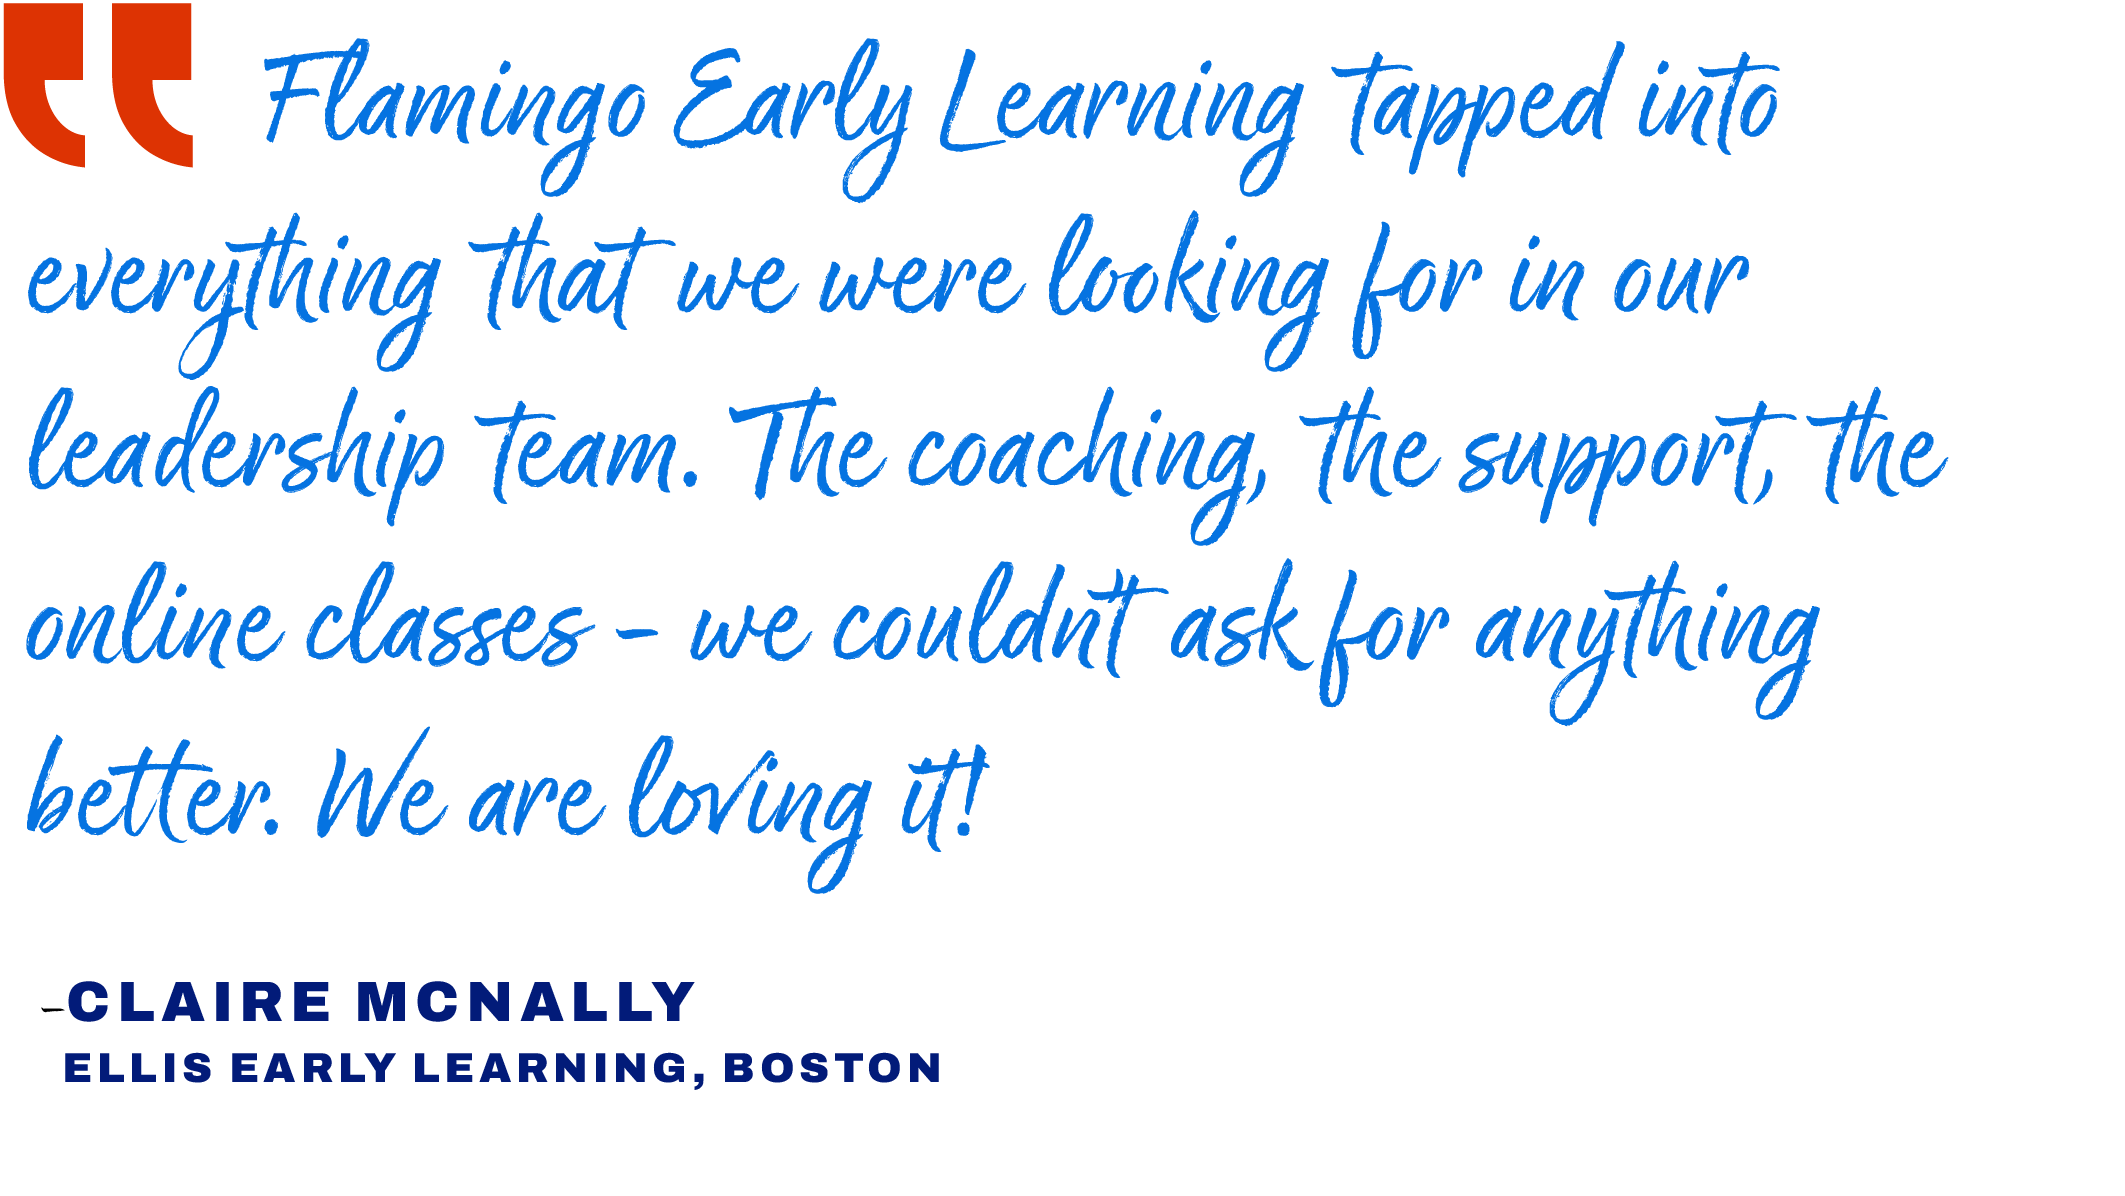 Quote that reads: "Flamingo Early Learning tapped into everything that we were looking for in our leadership team. The coaching, the support, the online classes - we couldn't ask for anything better. We are loving it!" said<br />
Claire McNally from<br />
Ellis Early Learning in Boston.